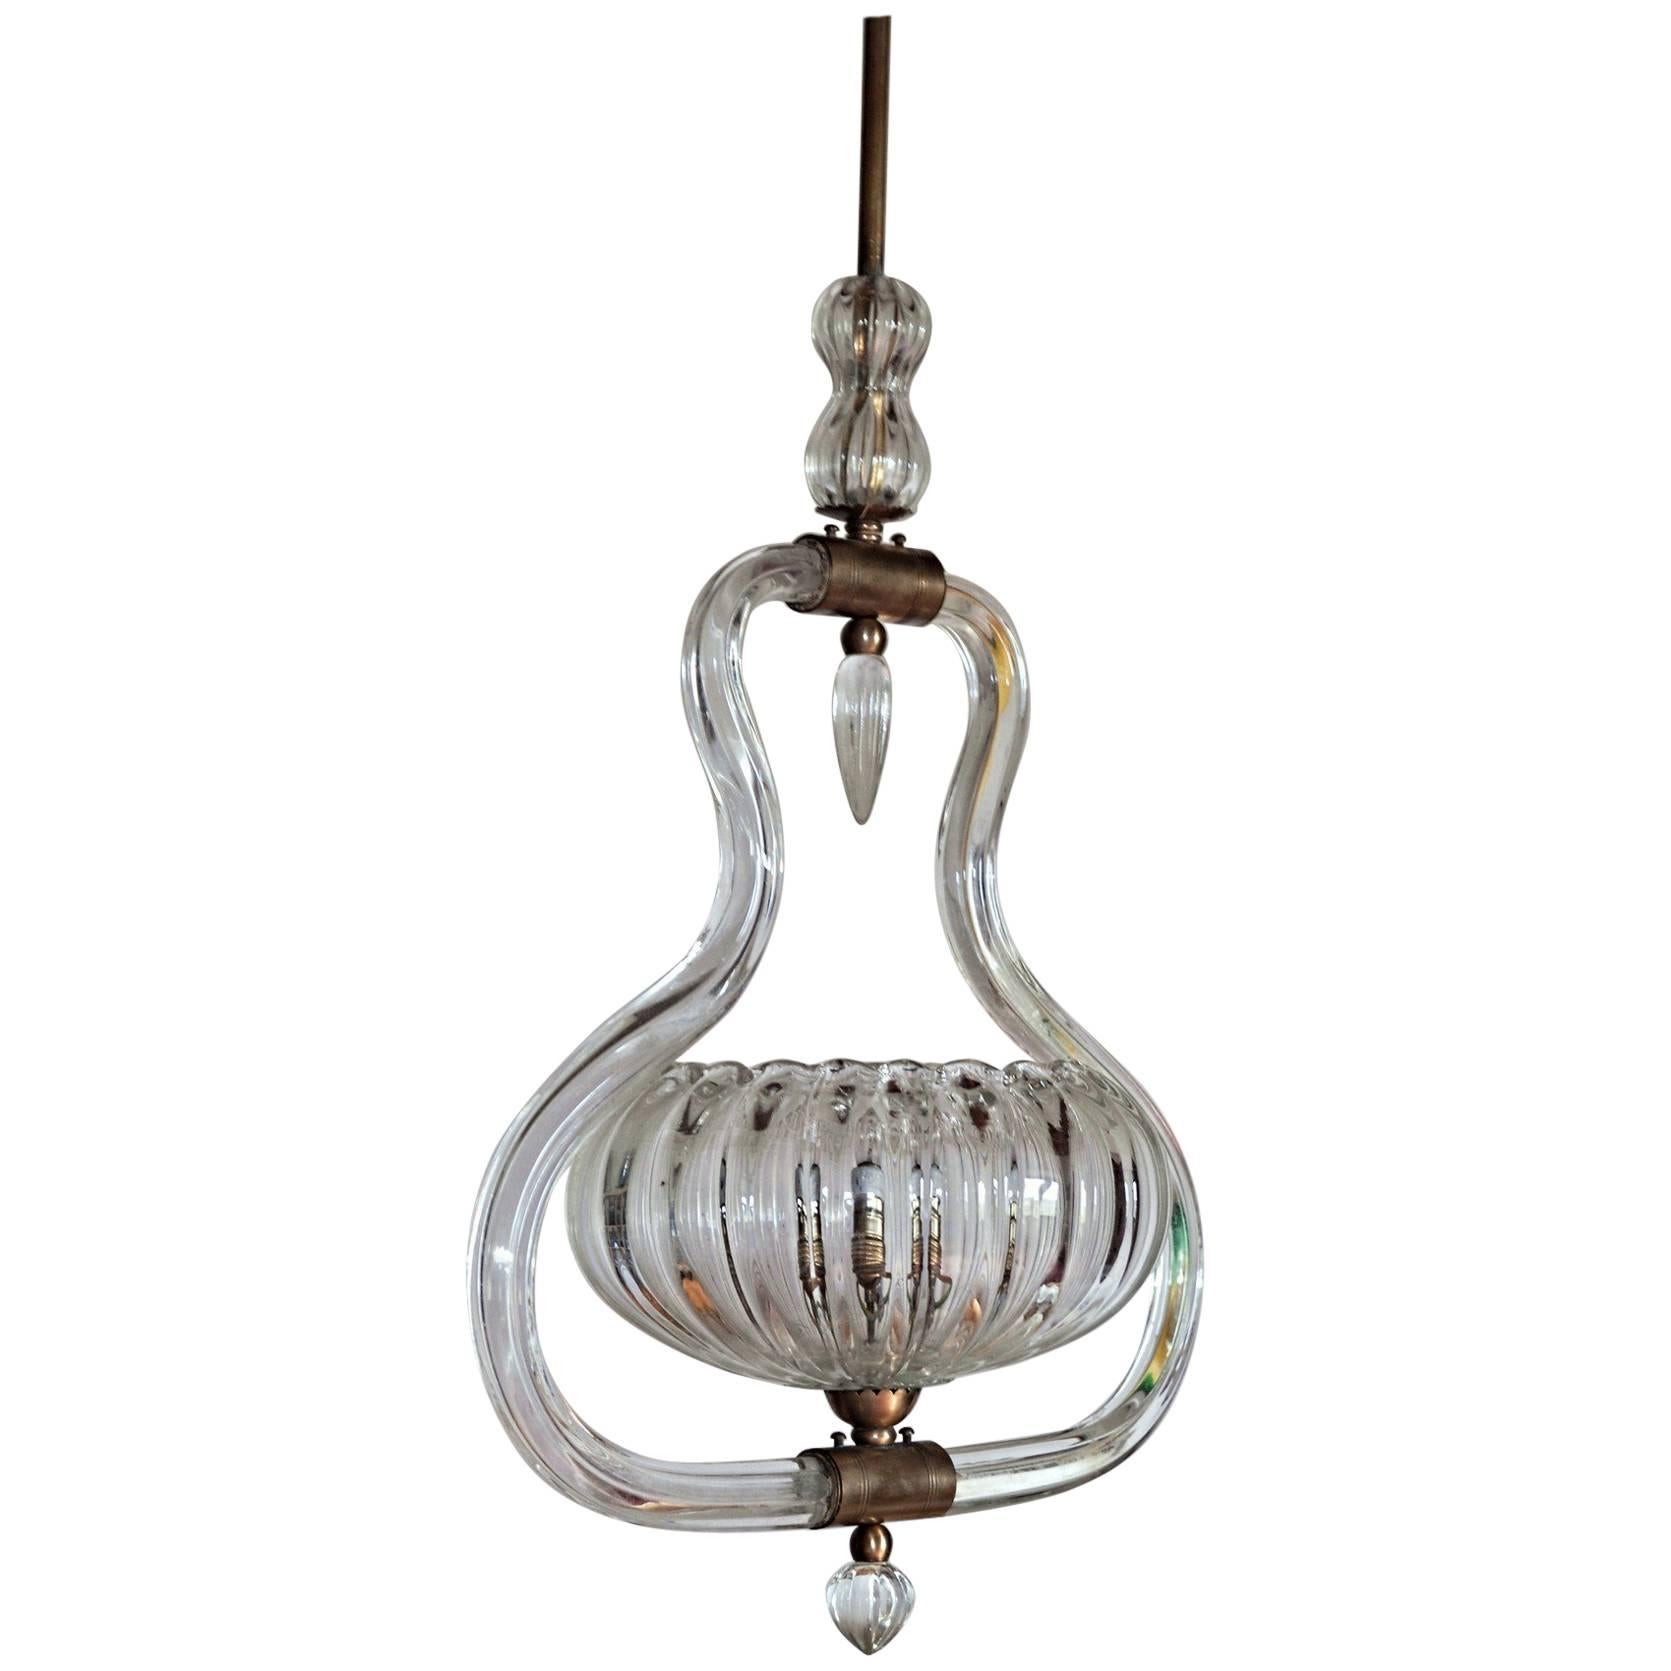 Art Deco Murano Cannister Rigadin Chandelier by Ercole Barovier, 1930s, Brass